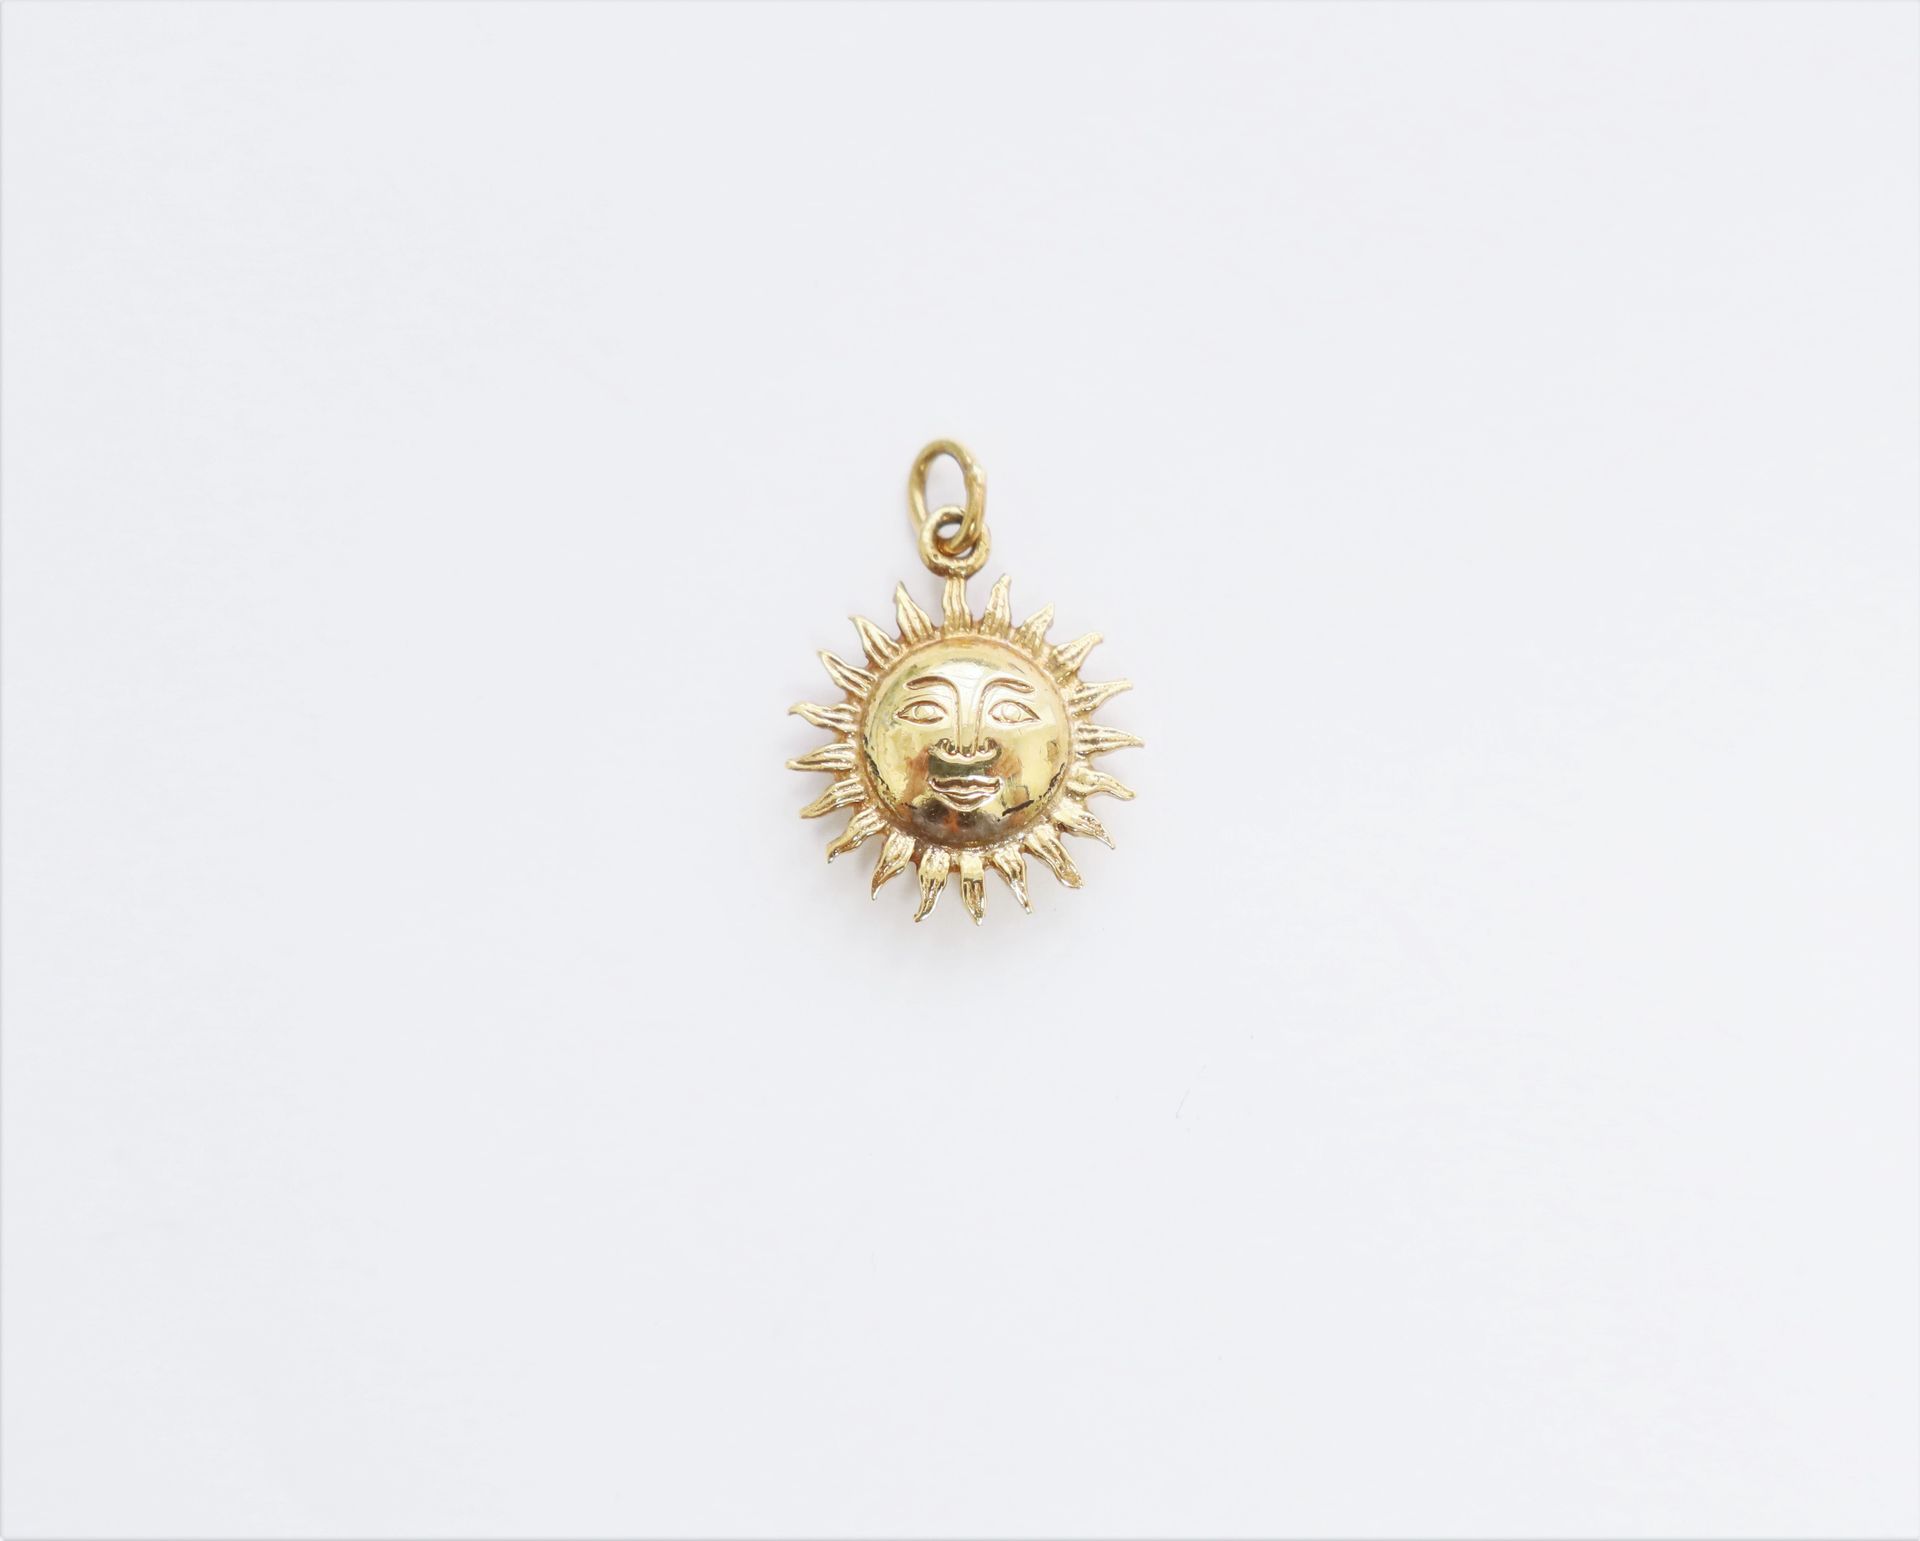 Null Pendant in 18K (750) gold representing a sun. Weight : 2 g